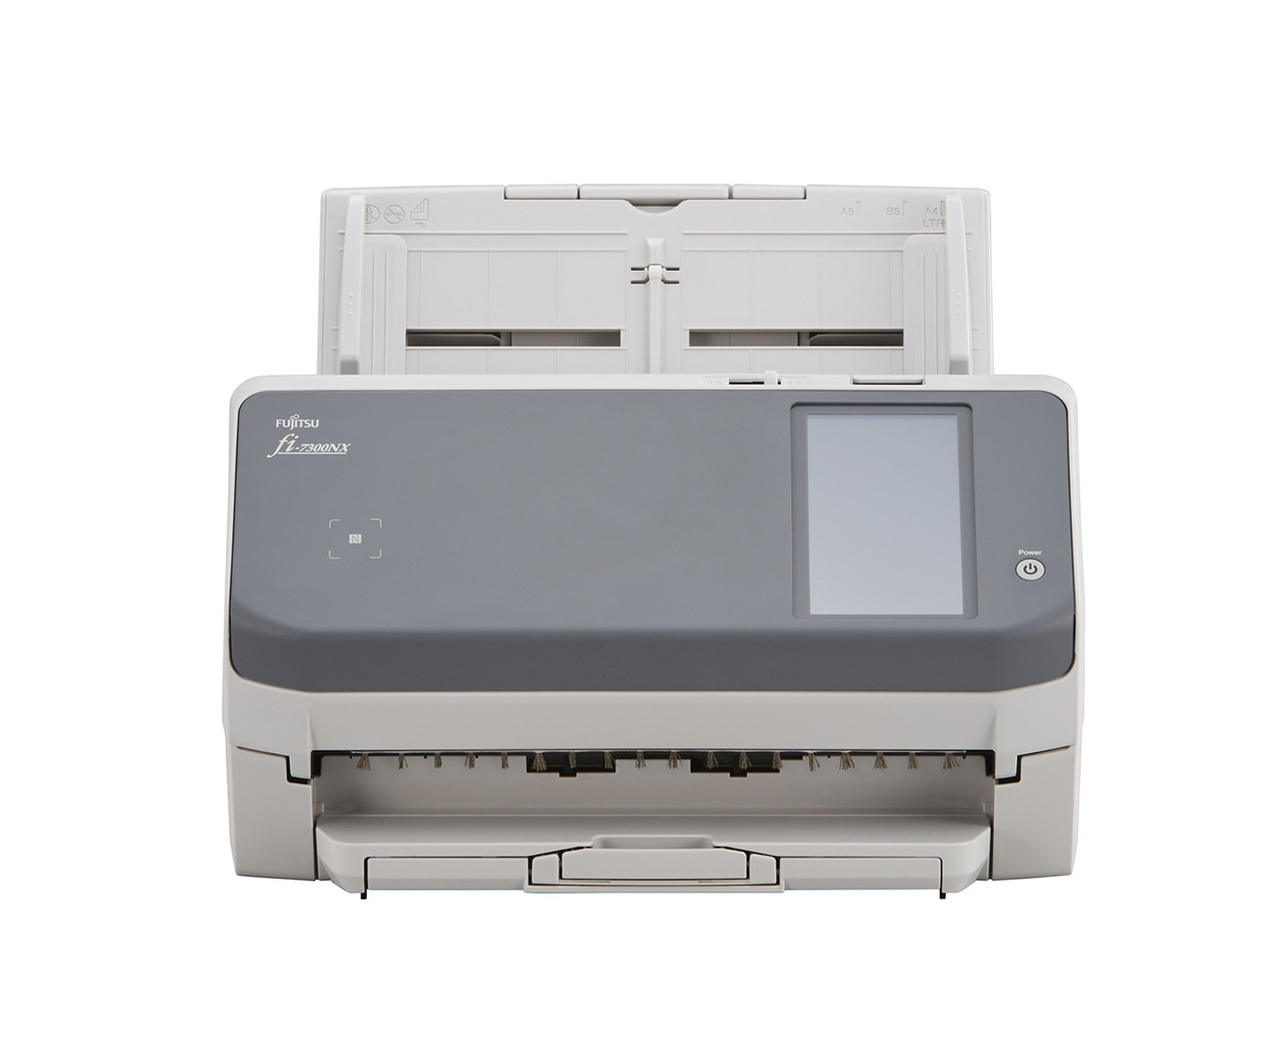 Fujitsu fi-7300NX - Document scanner - Dual CCD - Duplex - 8.5 in x 14 in - 600 dpi x 600 dpi - up to 60 ppm (mono) / up to 60 ppm (color) - ADF (80 sheets) - up to 4000 scans per day - Gigabit LAN, Wi-Fi, USB 3.1 Gen 1